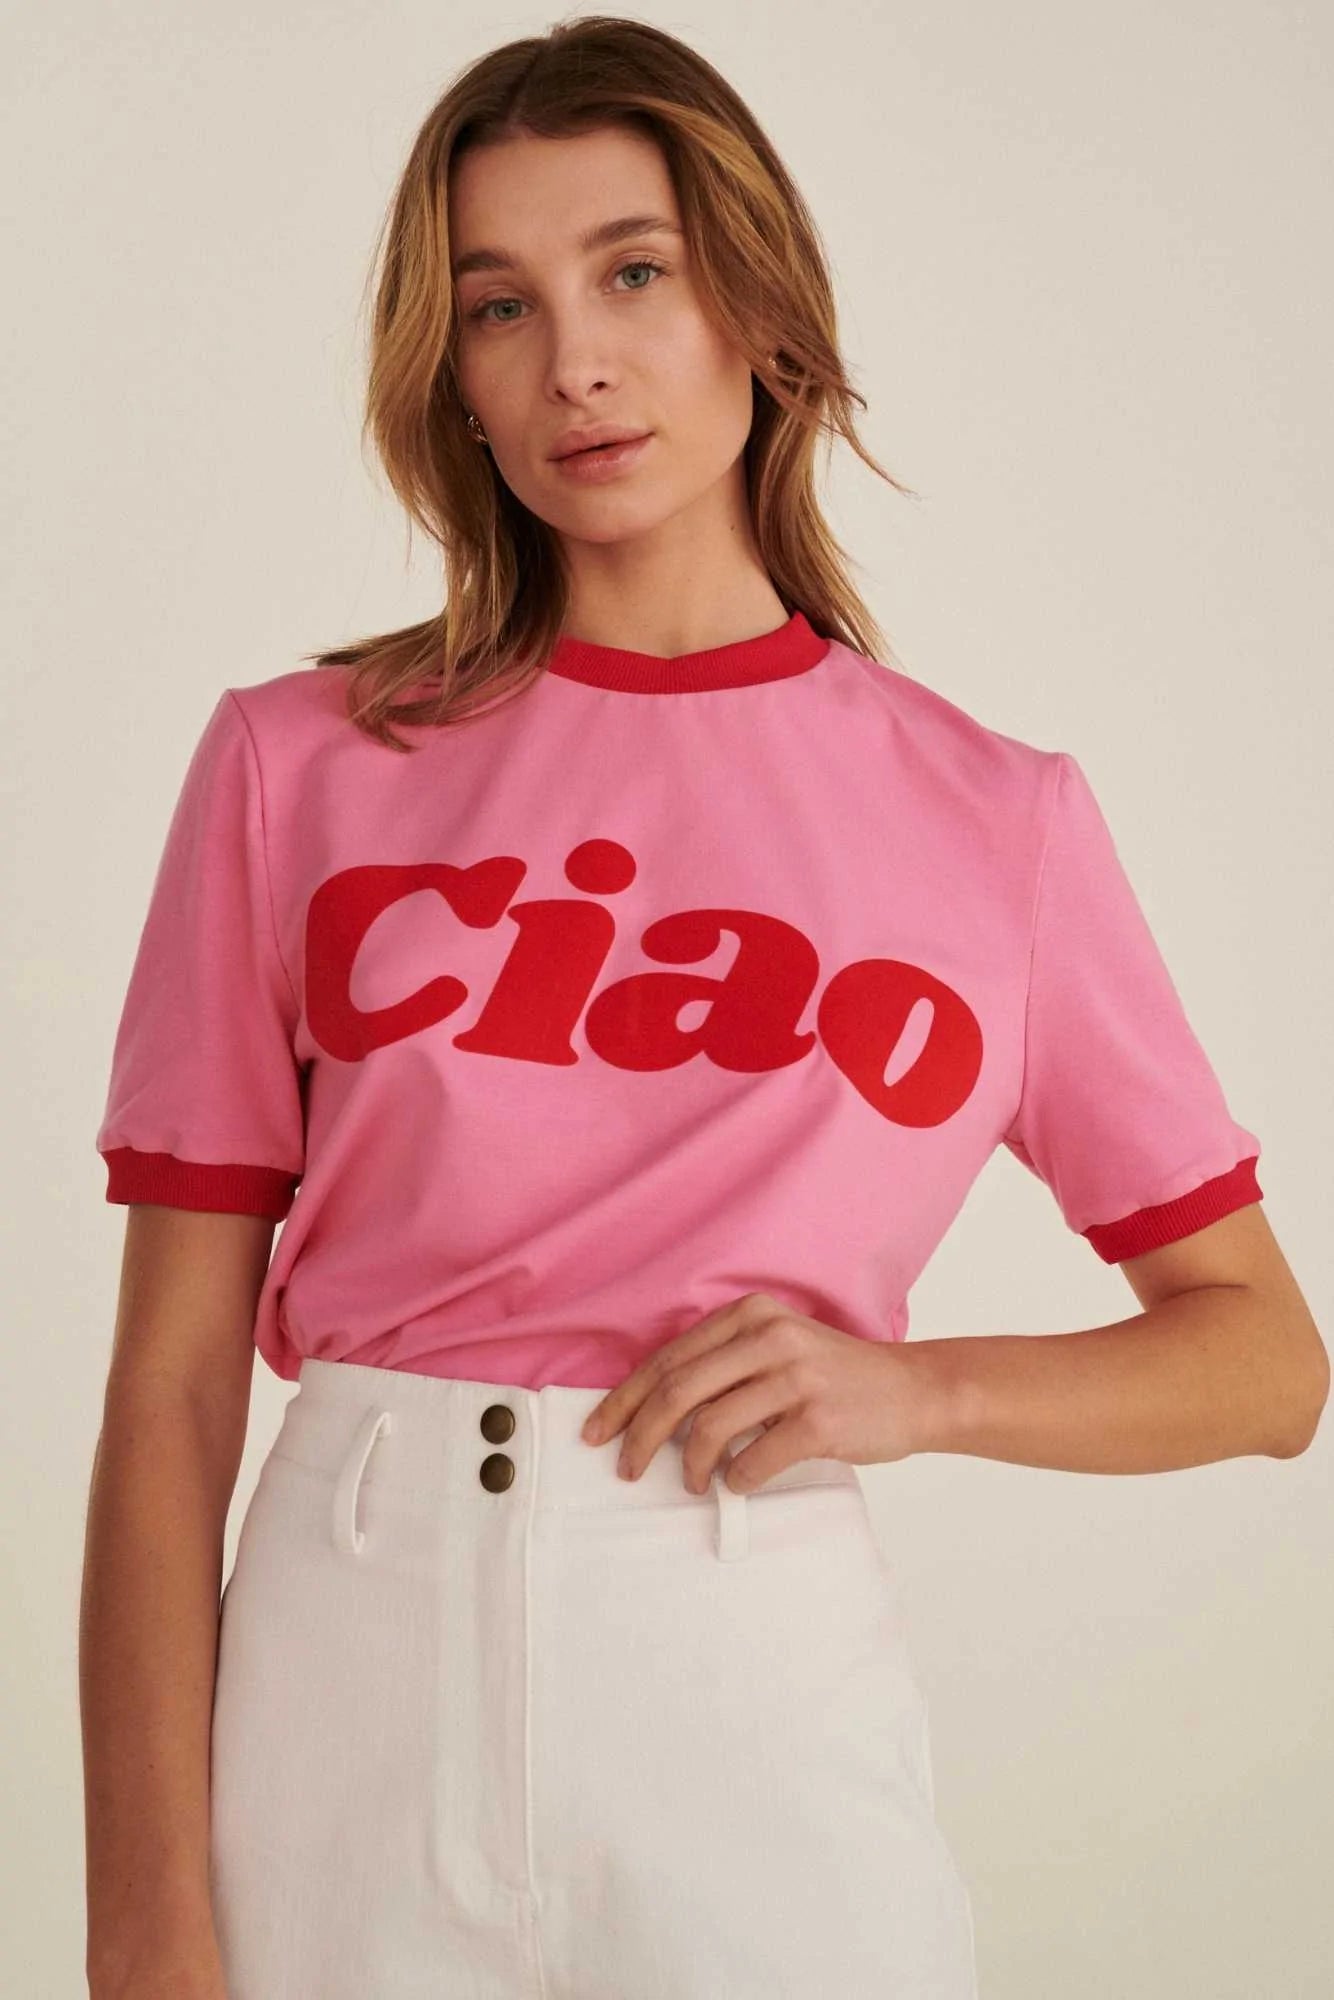 Les Goodies - She Is Sunday Ciao Sunday Tee Pink